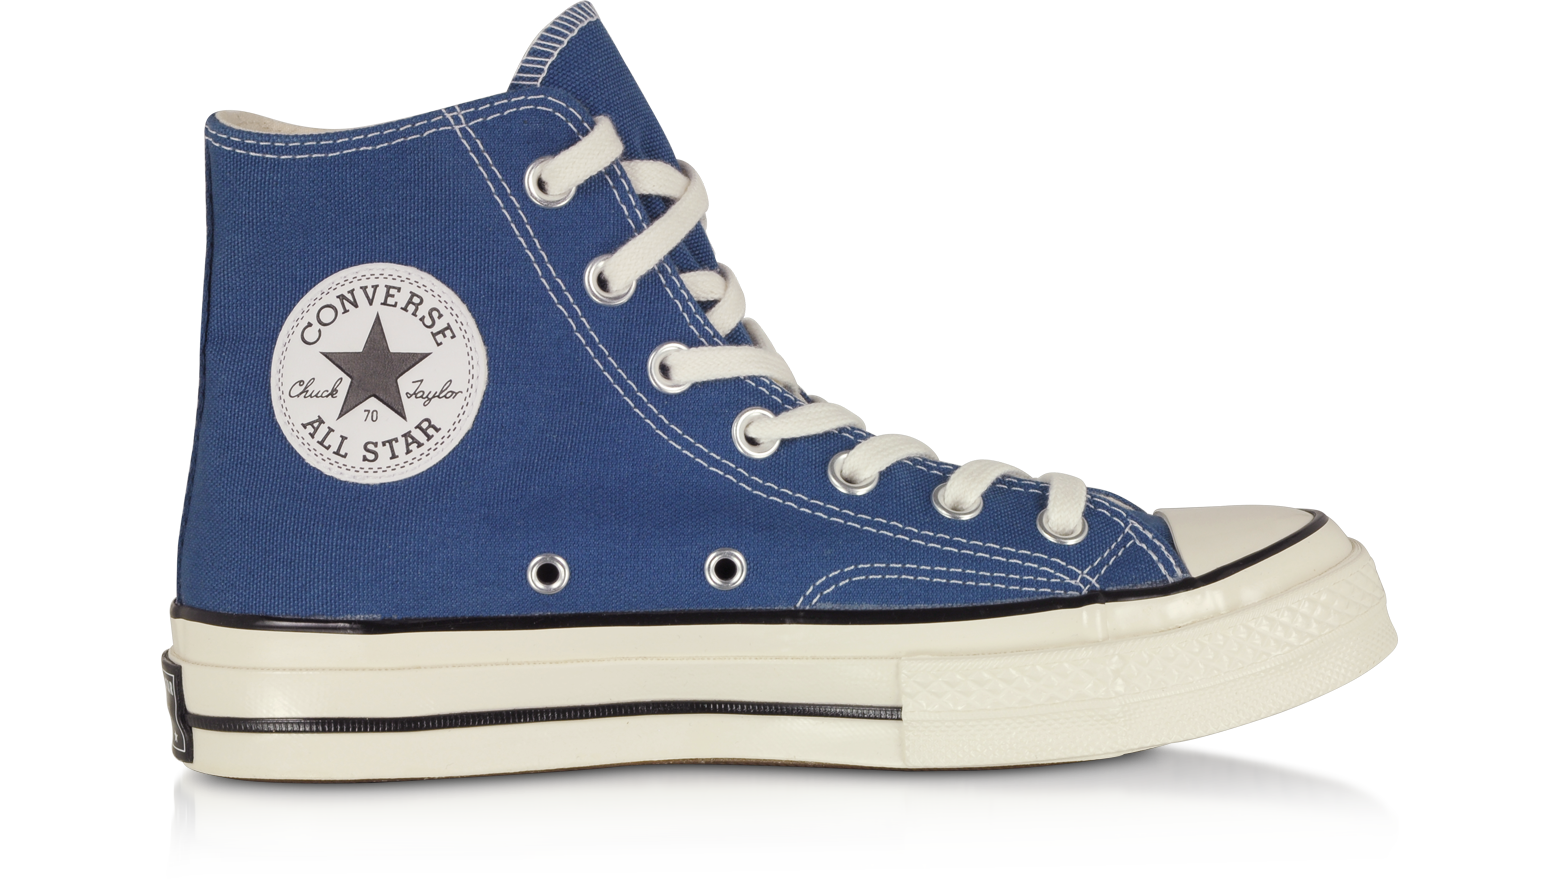 Converse Limited Edition Chuck 70 True Navy Sneakers 9.5 (11.5 WOMENS US | 9.5 UK | 43 EU) at FORZIERI